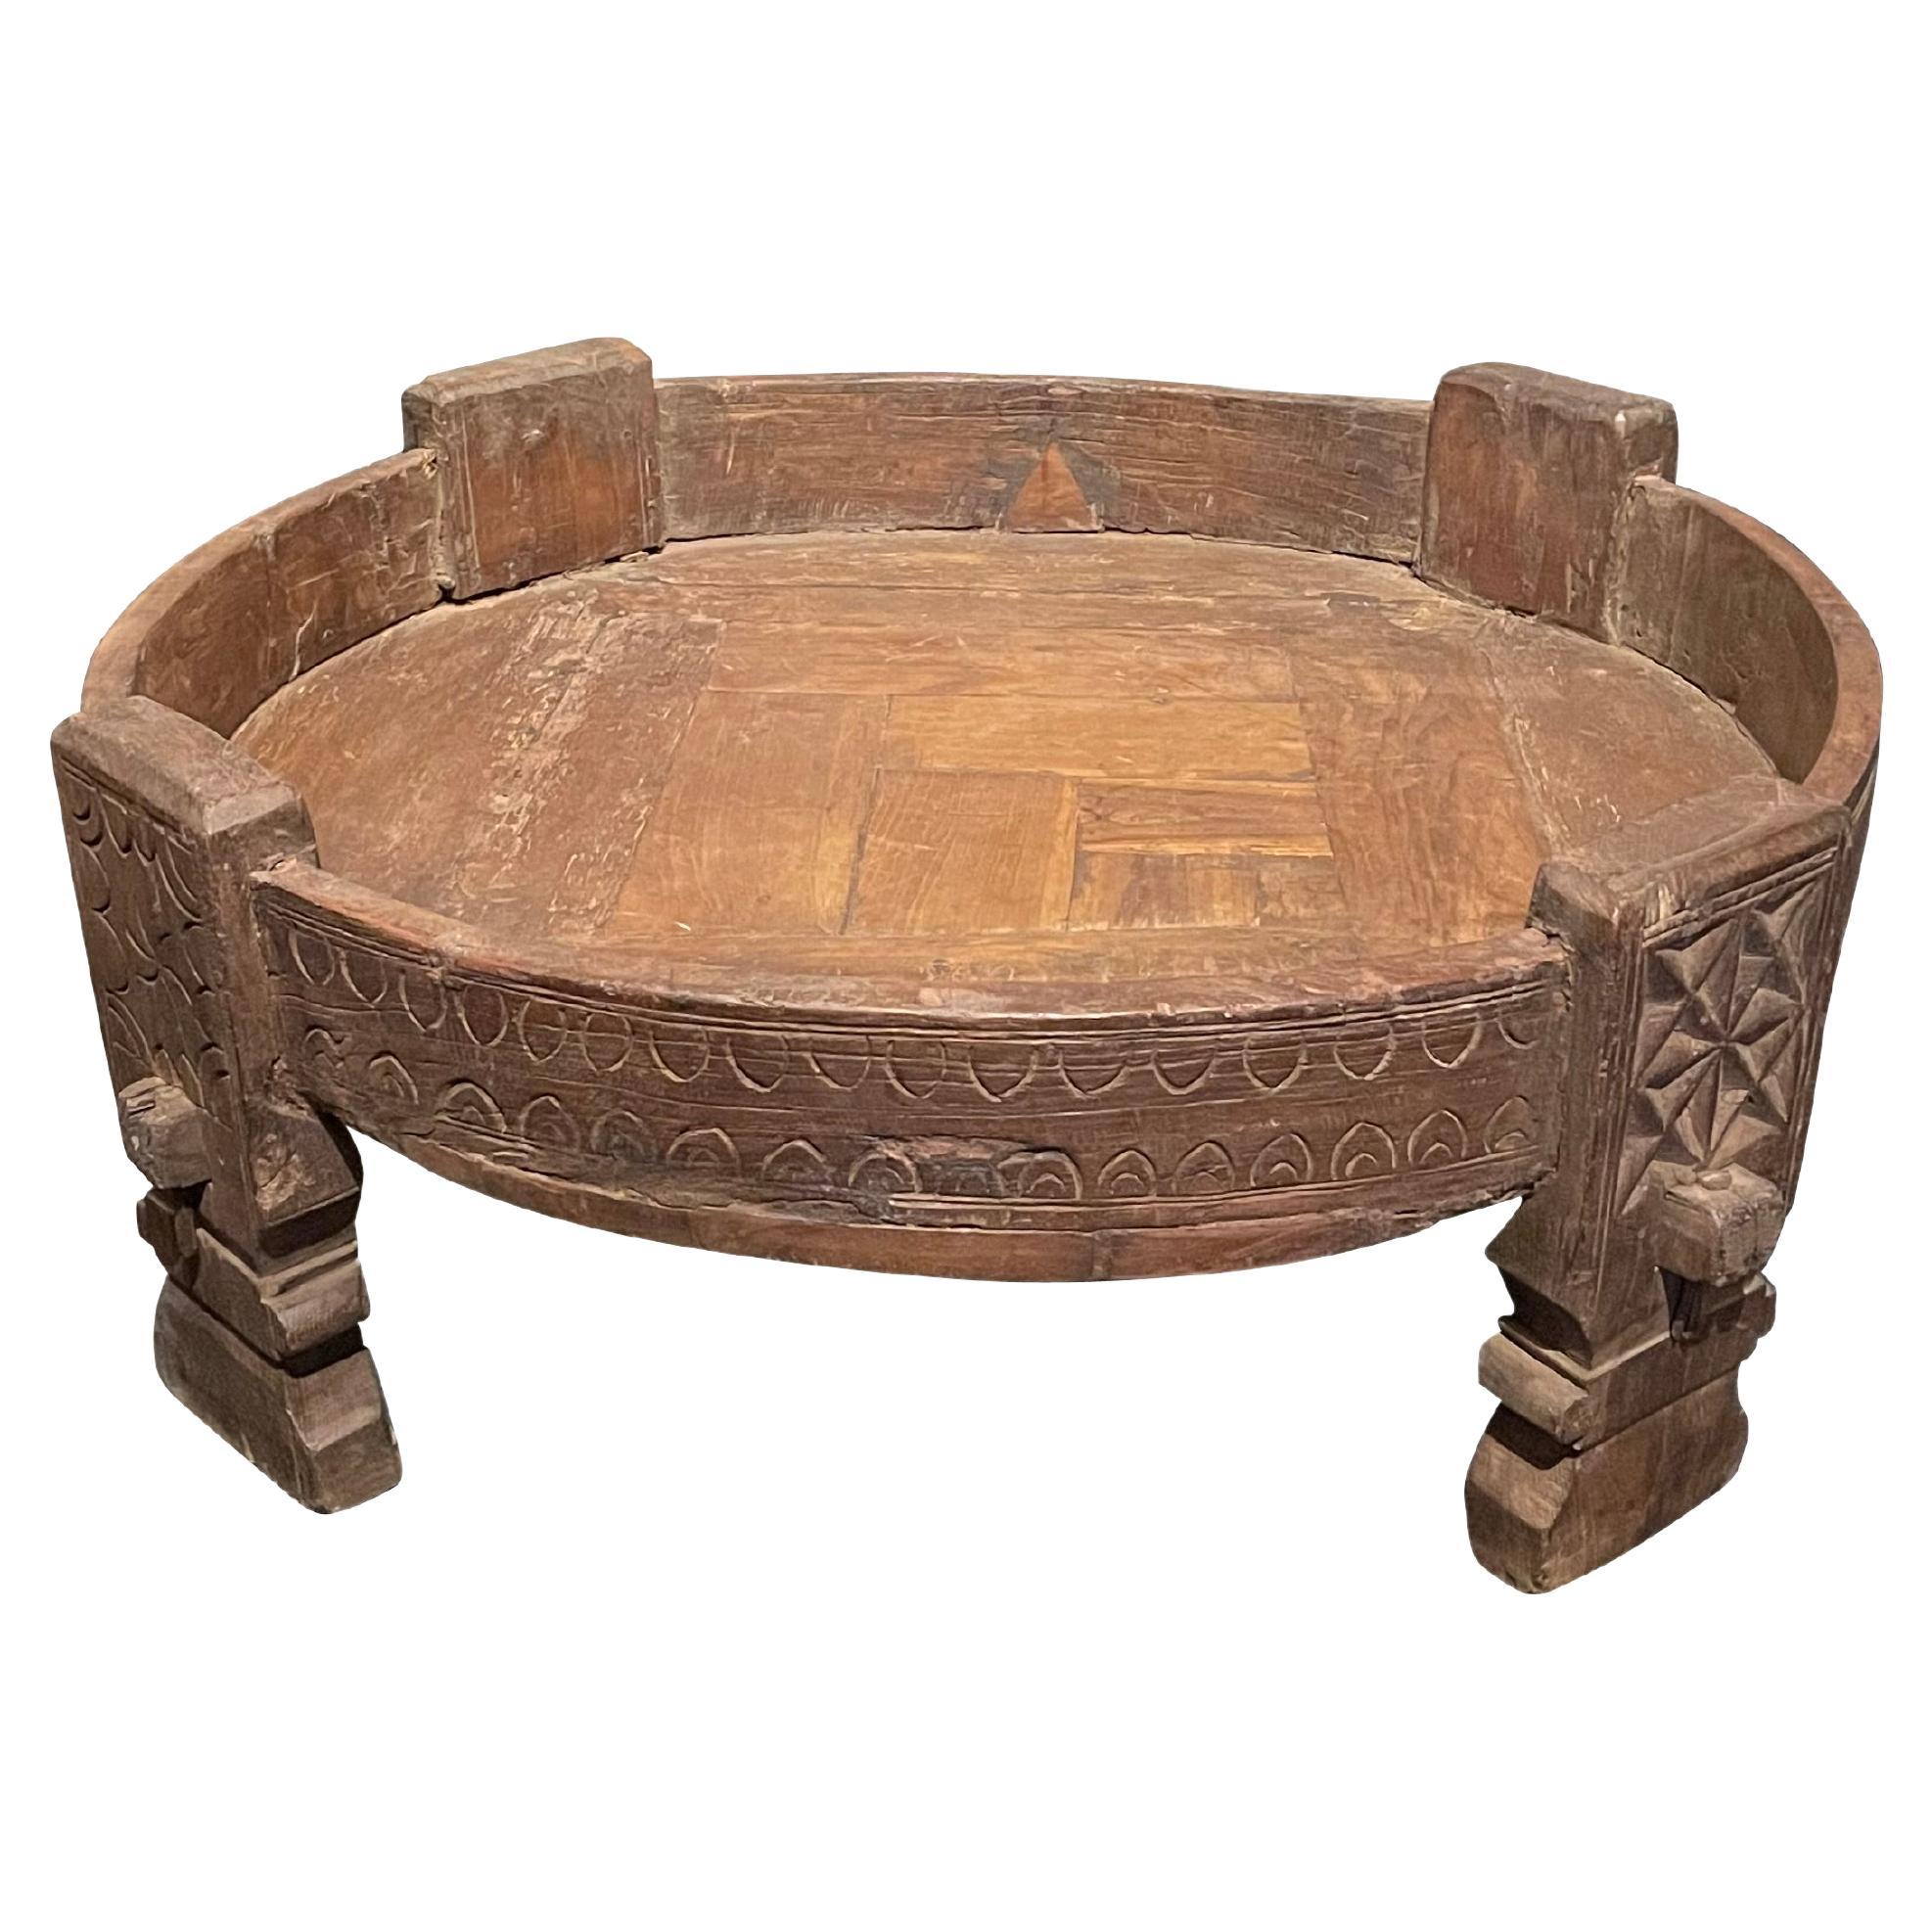 Extra Large Wooden Footed Bowl, India, 19th Century For Sale